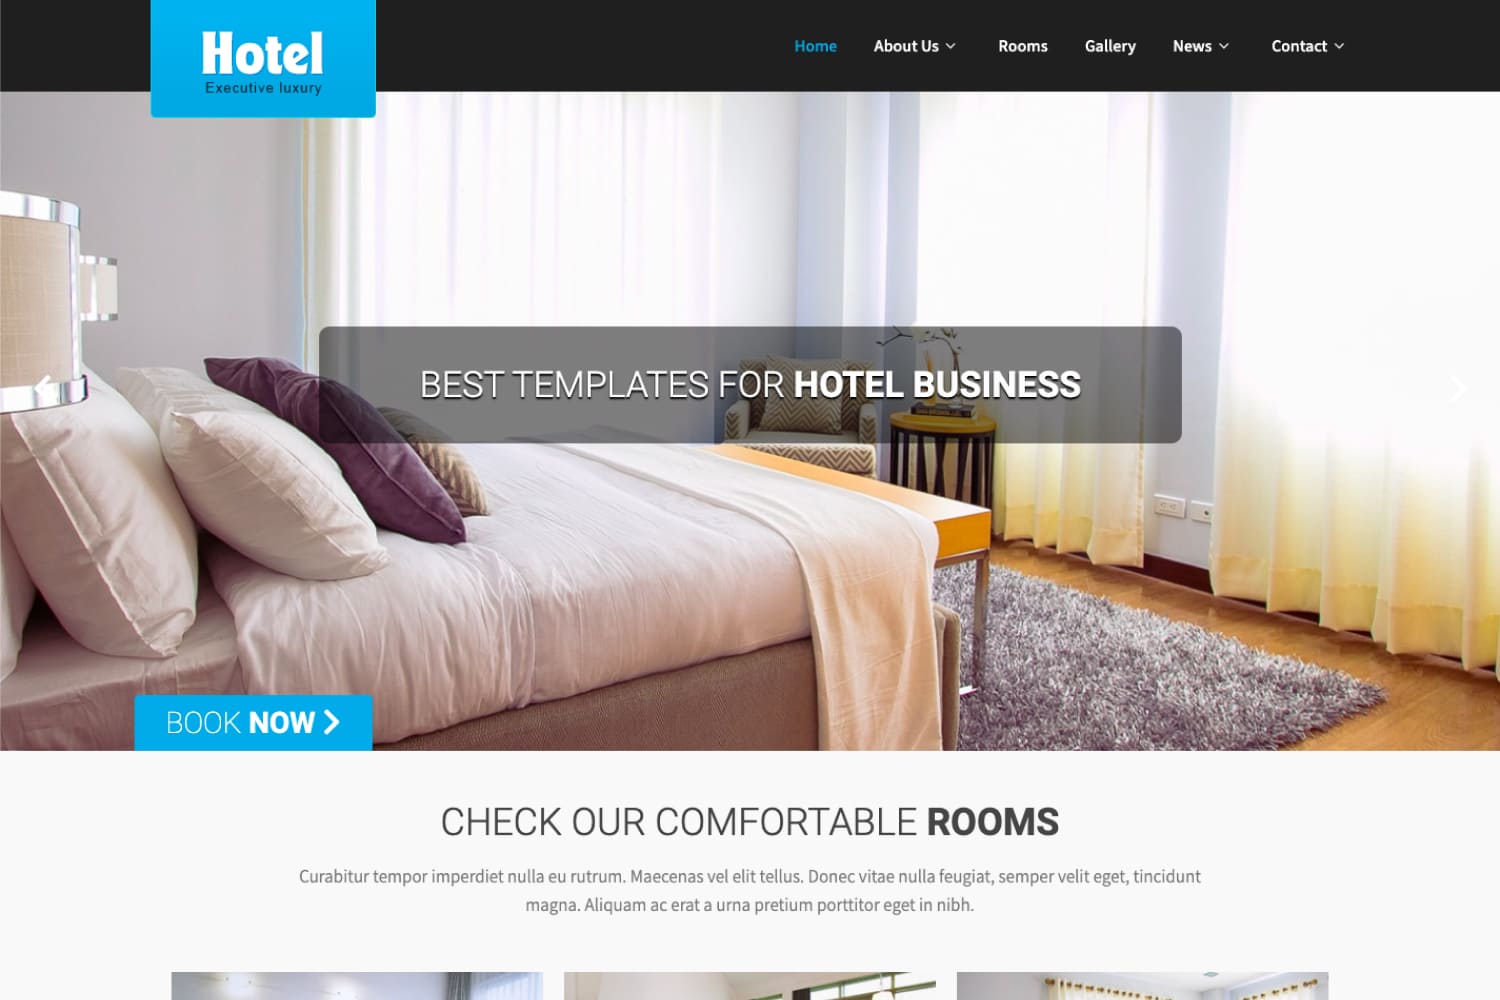 The main page of the hotel website with a photo of the room and a block of room descriptions.